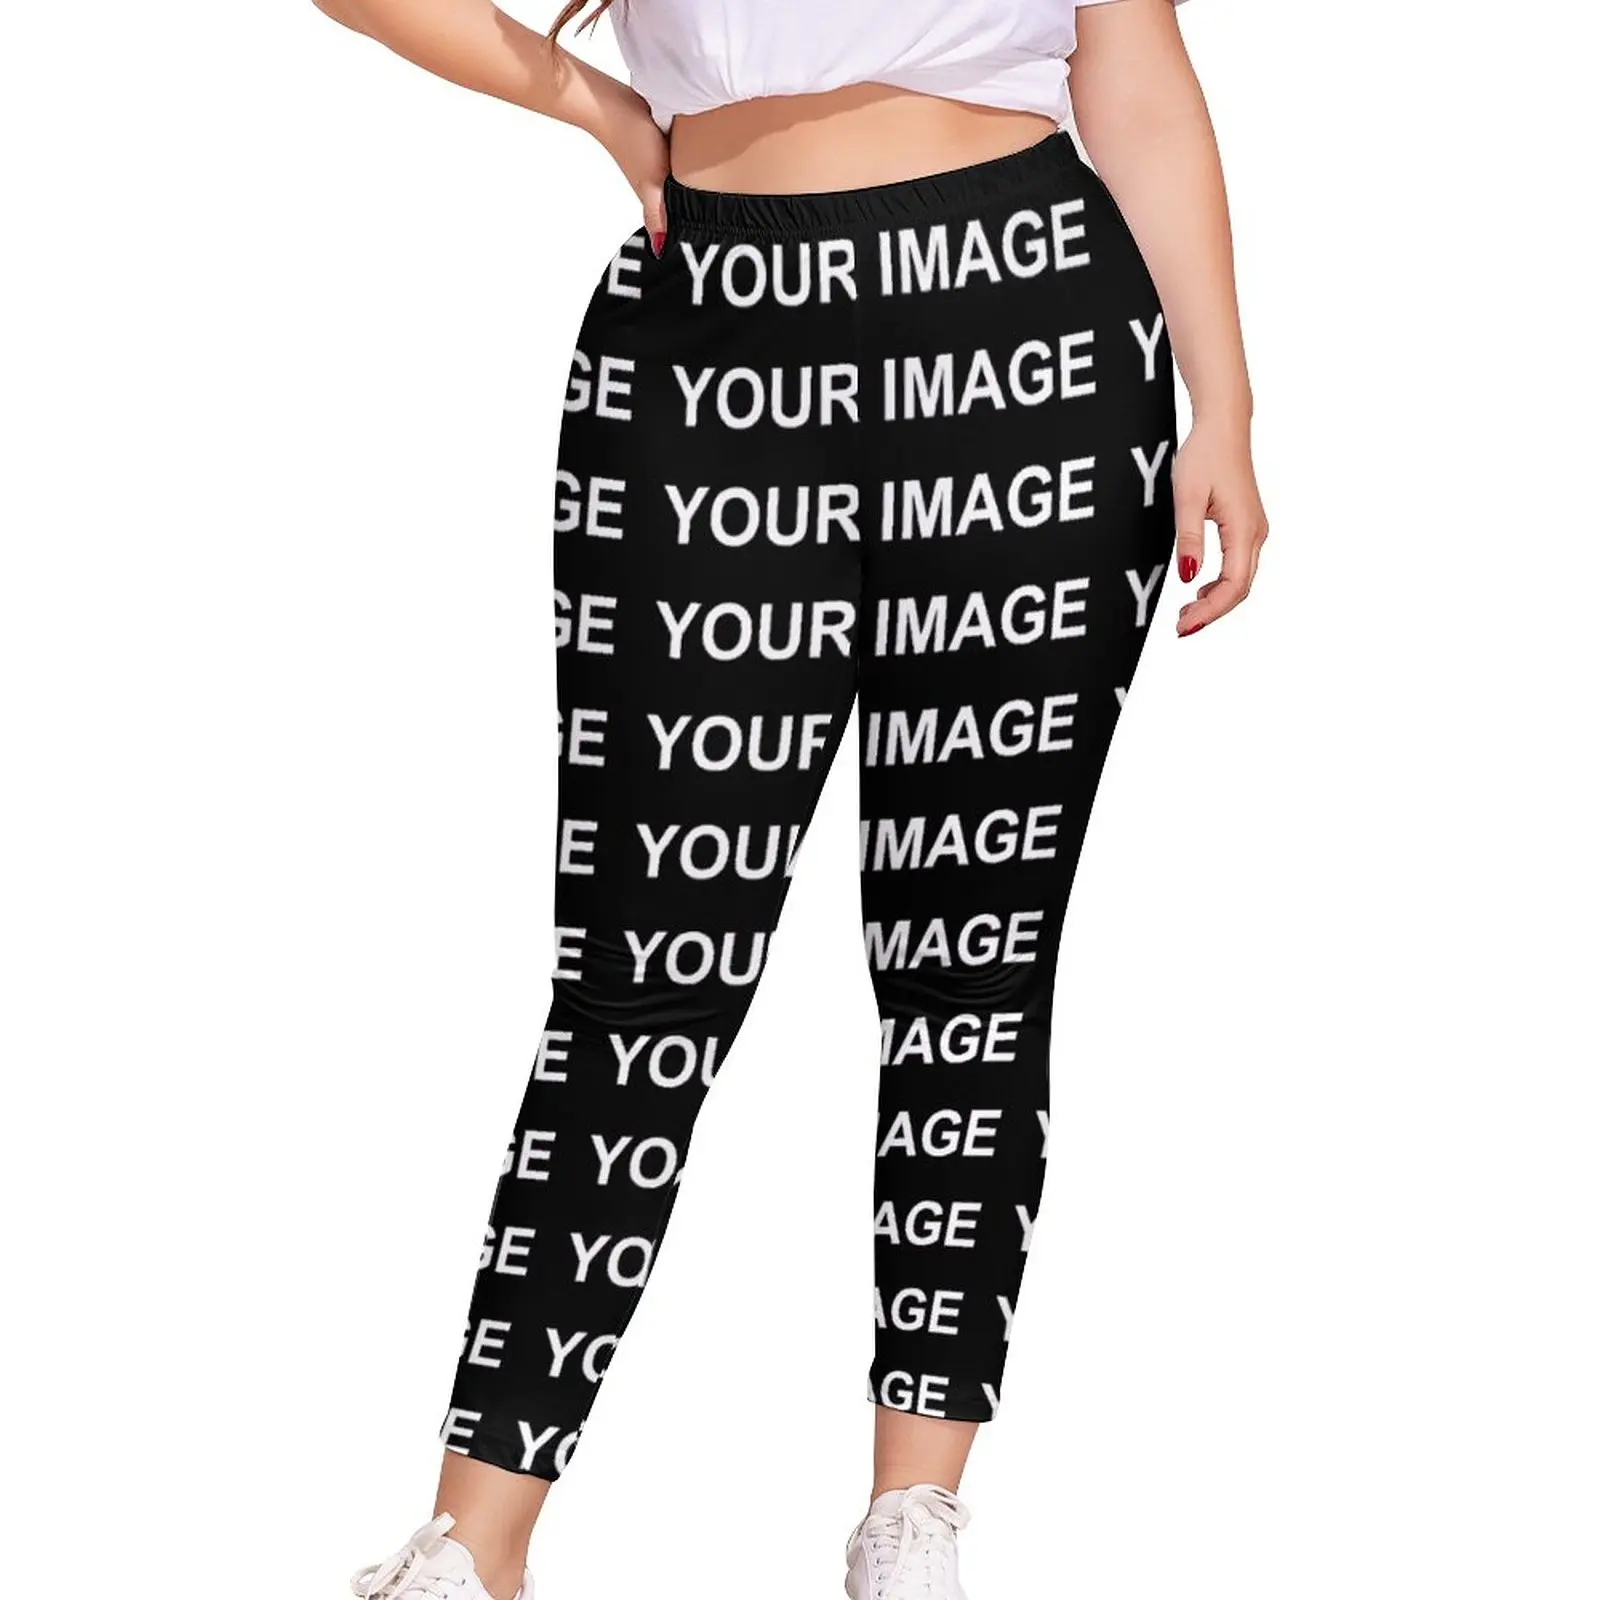 Your Image Customized Leggings Custom Made Design Running Pattern Leggins Womens Stretchy Funky Pants Gift Idea